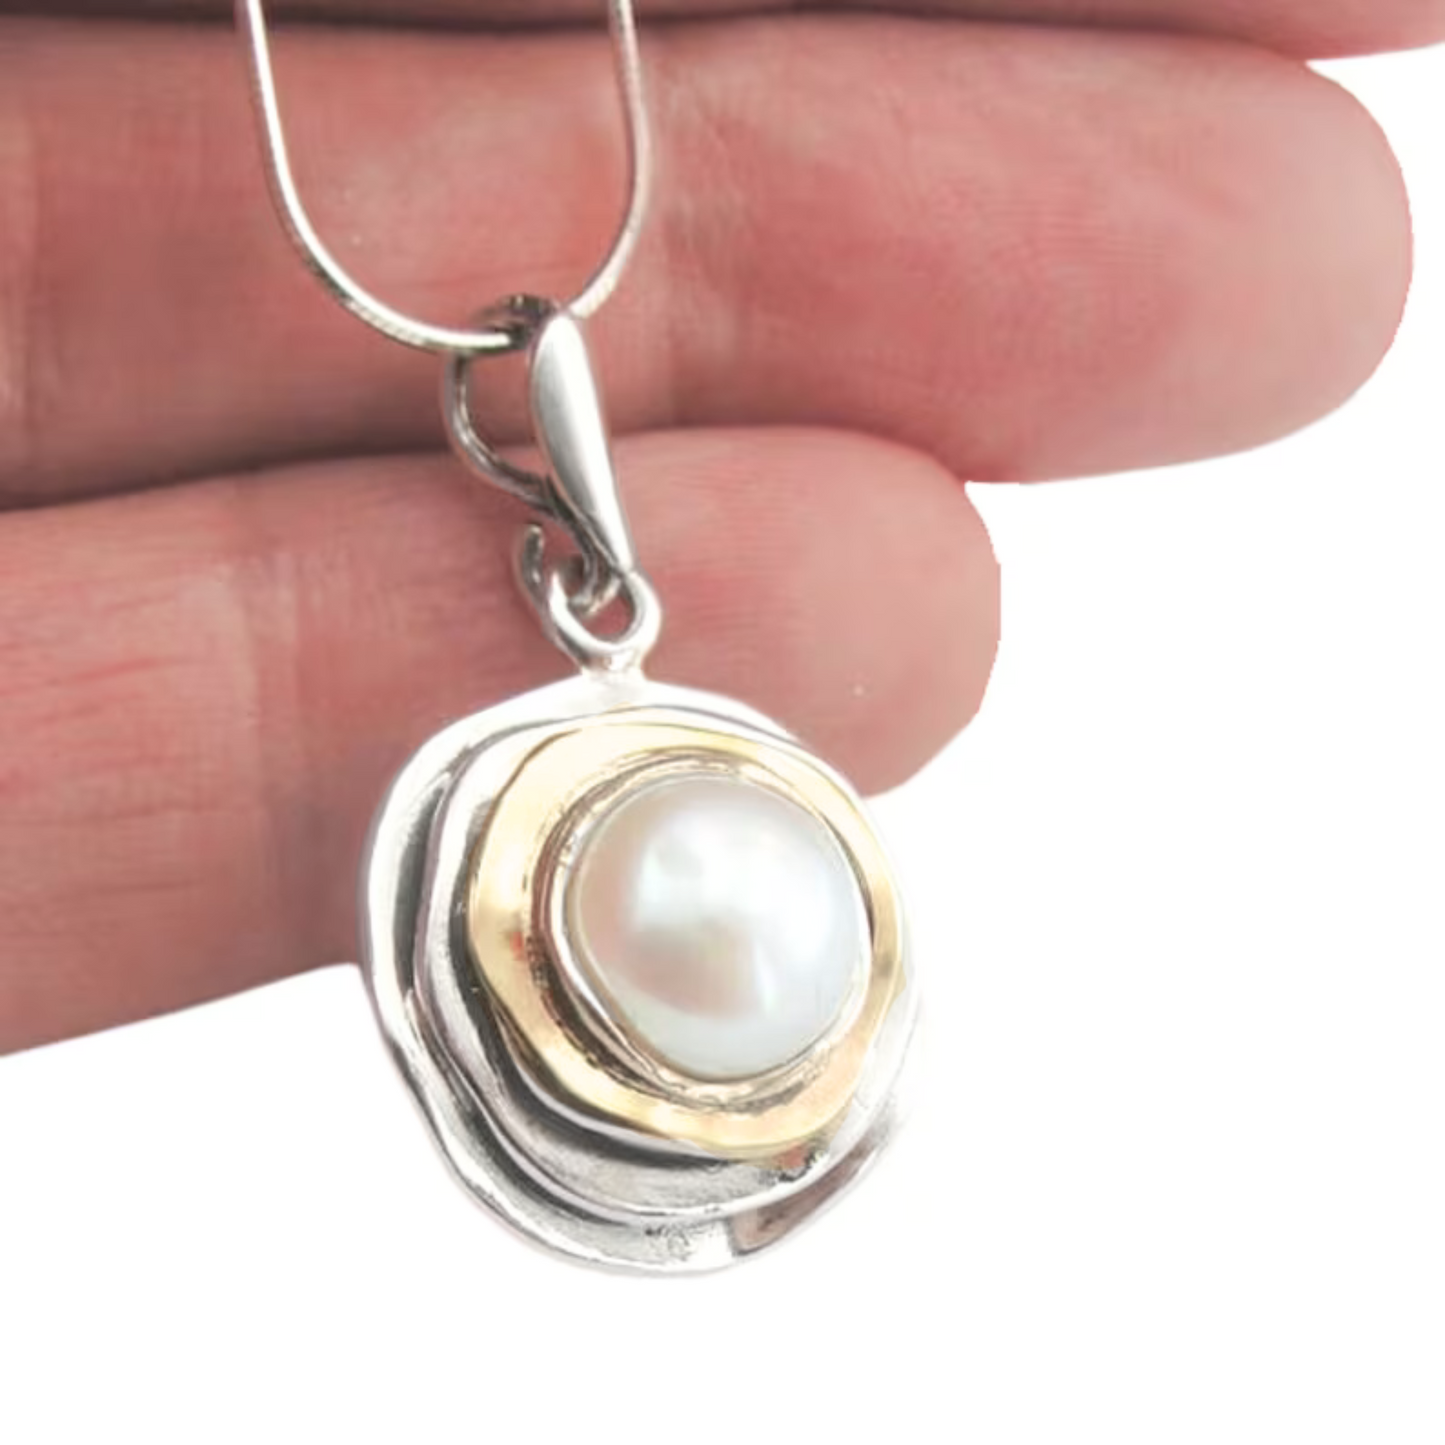 Pearl pendant, Round pearl pendant, Silver and gold Pendant, Pearl necklace, Israeli jewelry, Israeli design, gift for her, Pearl necklace